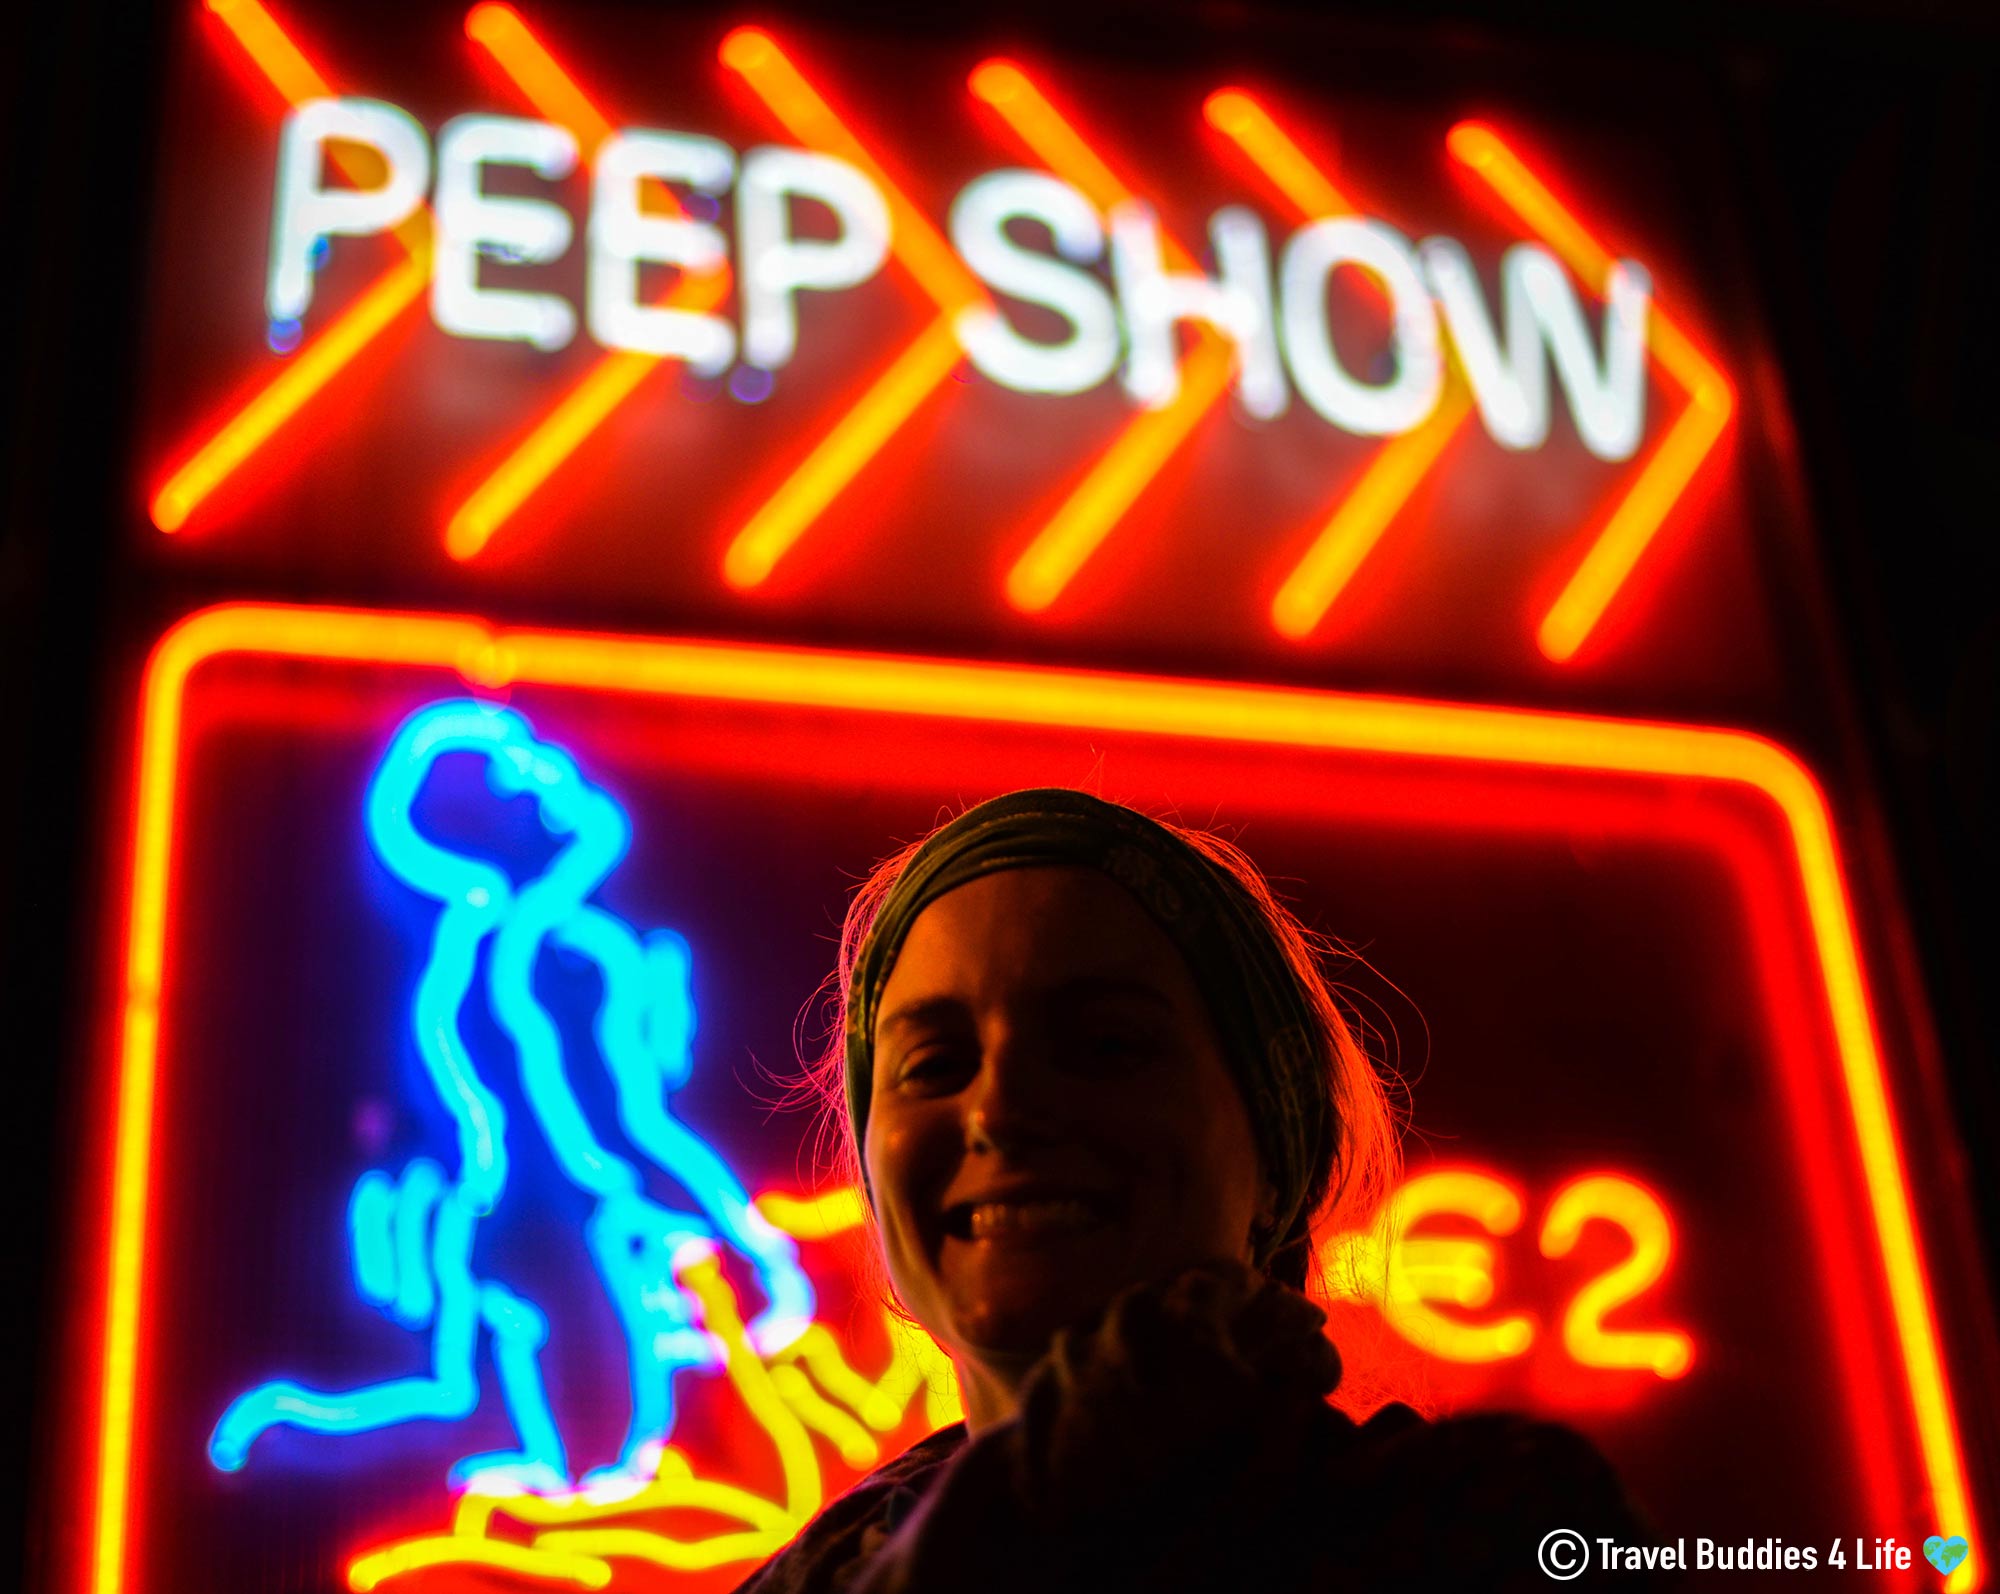 Ali Experiencing Her First Peep Show In The Red Light District, Amsterdam, The Netherlands